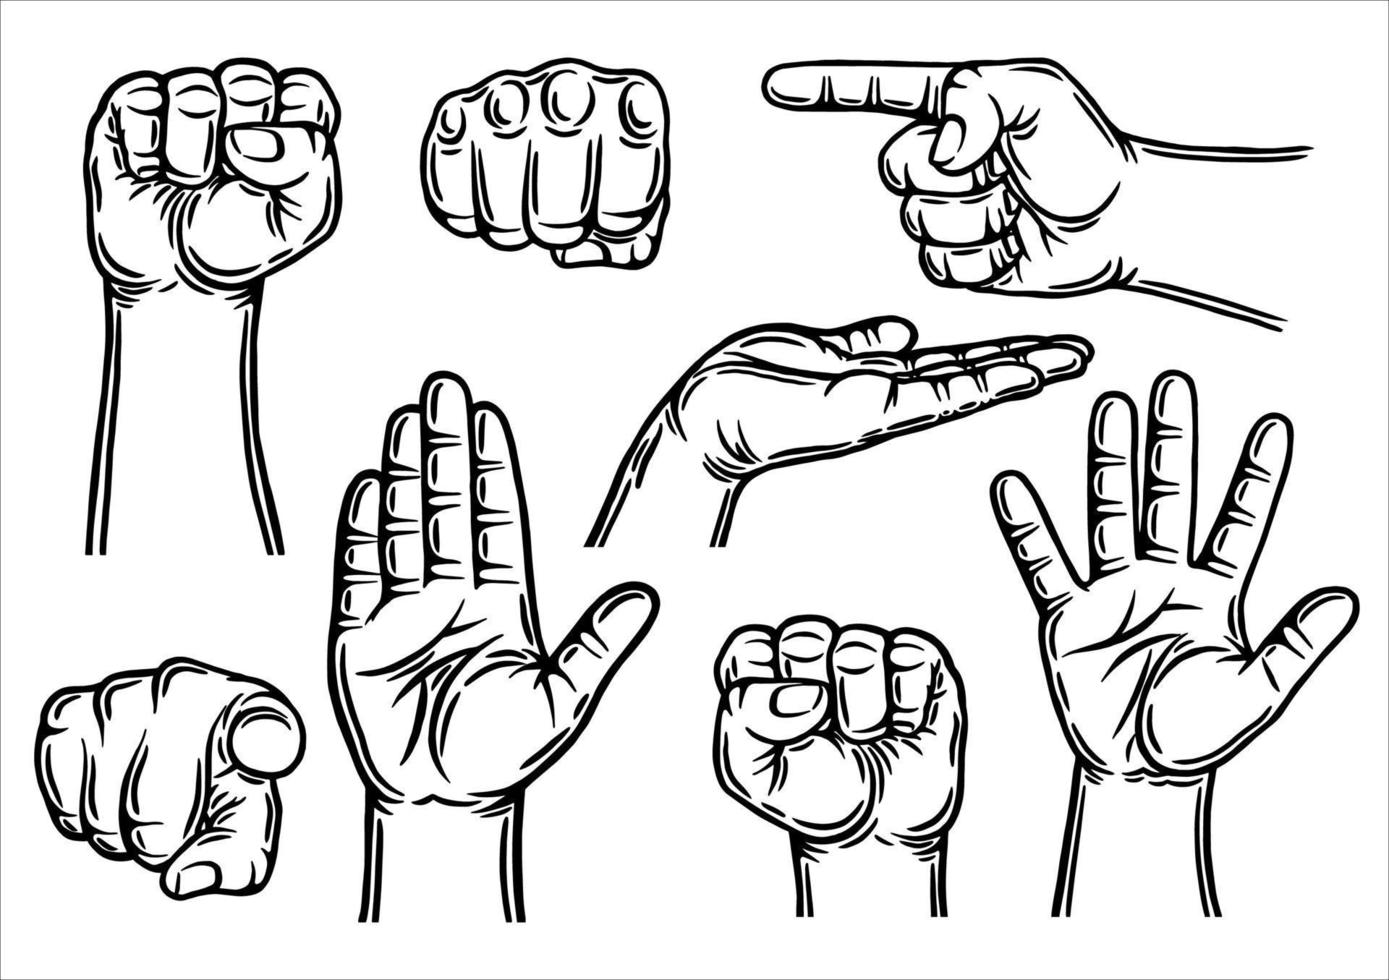 Male hand gestures. Outline contour. Design element. Vector illustration isolated on white background. Template for books, stickers, posters, cards, clothes.